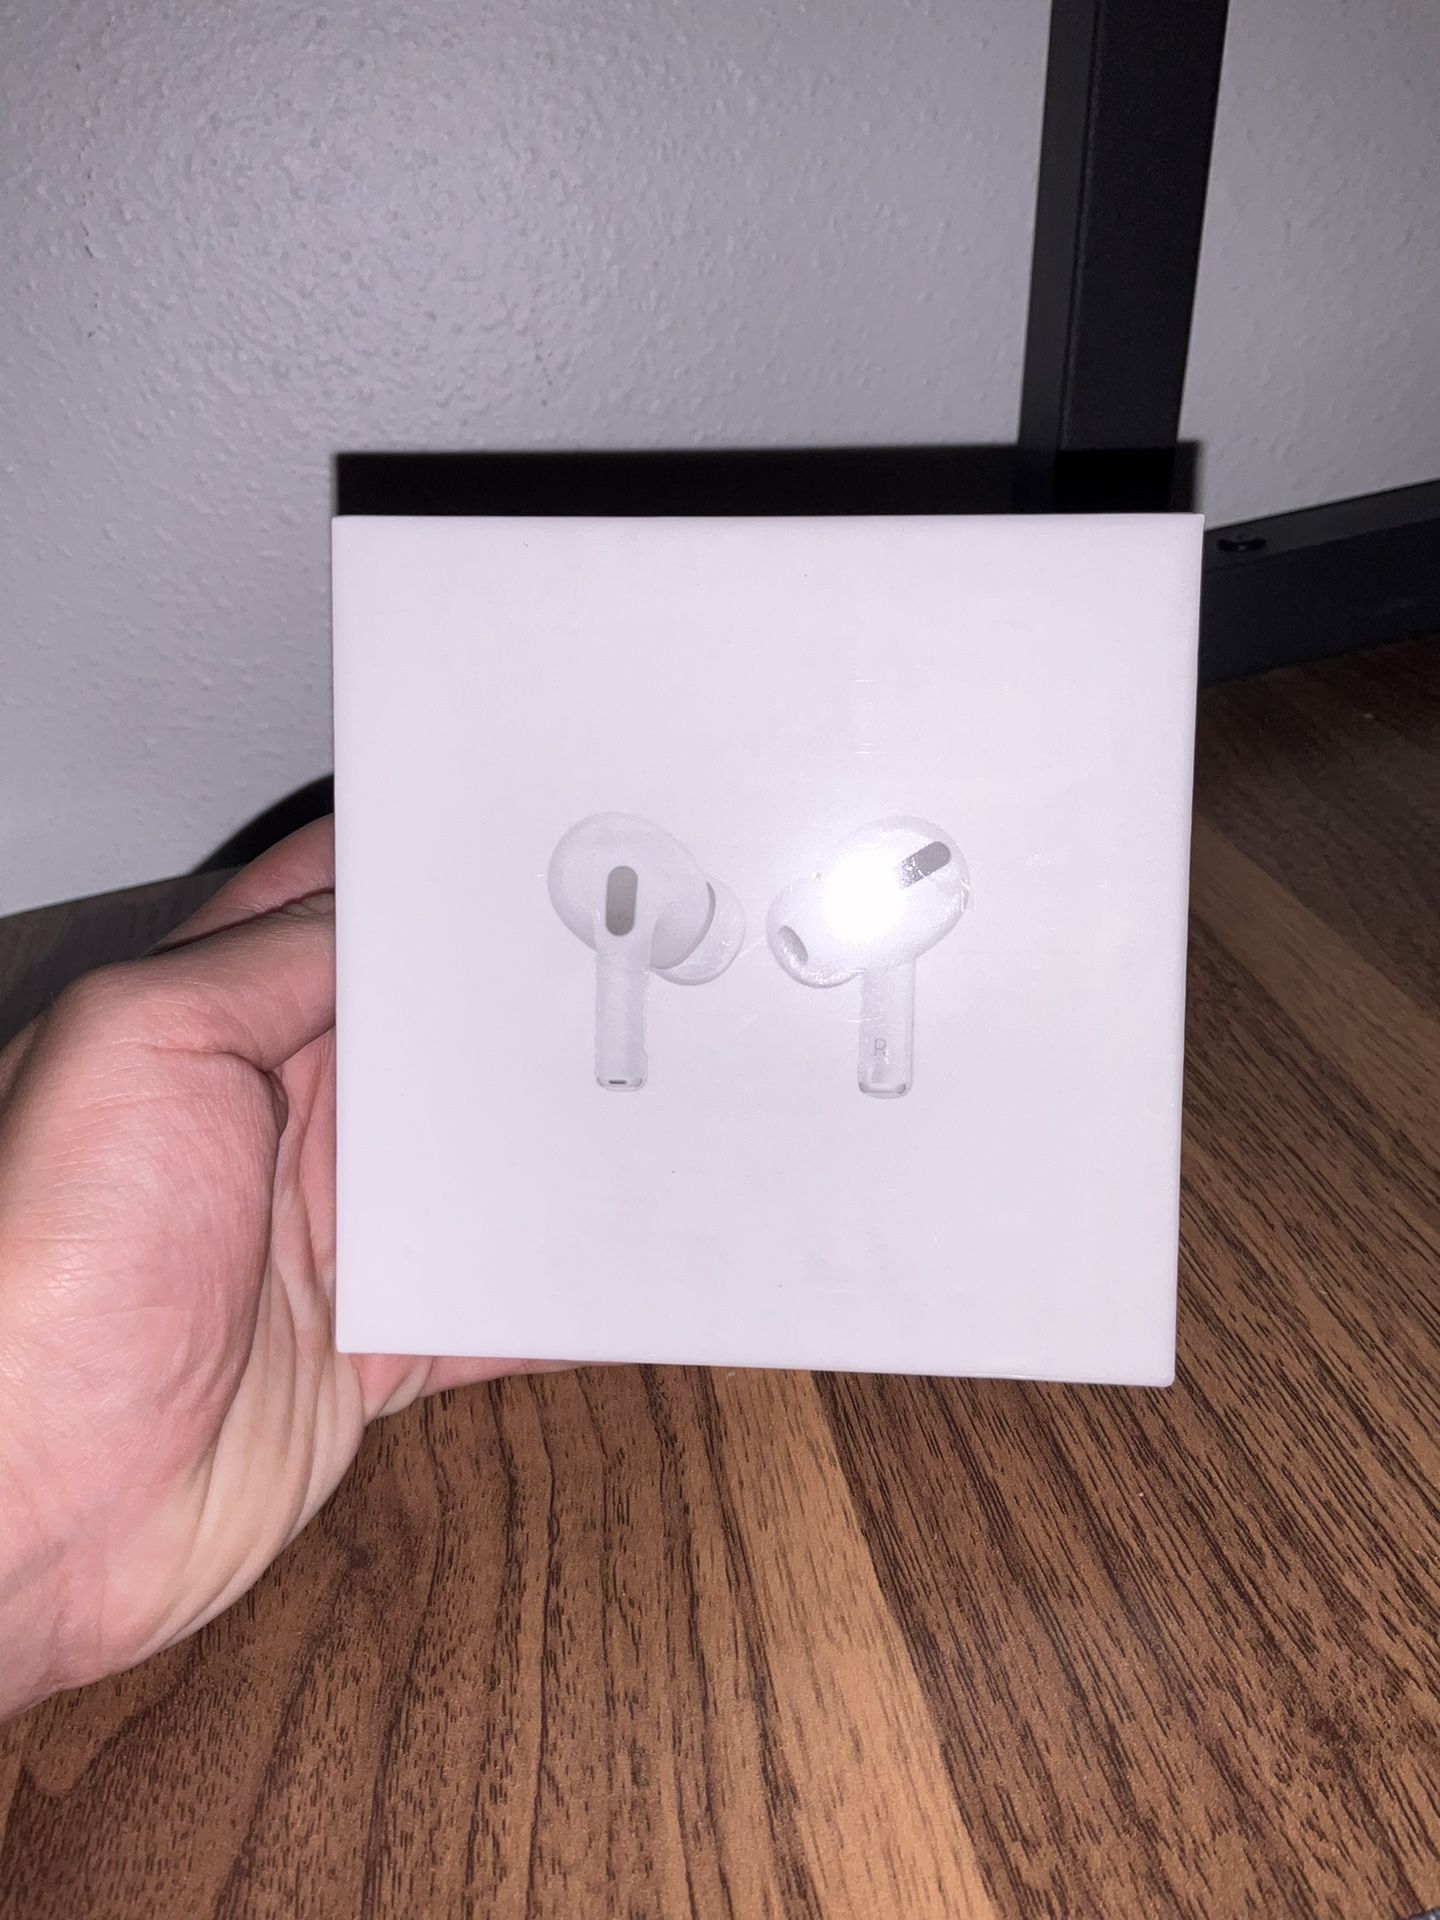 AirPod Pros (sealed) (CAN NEGOTIATE)